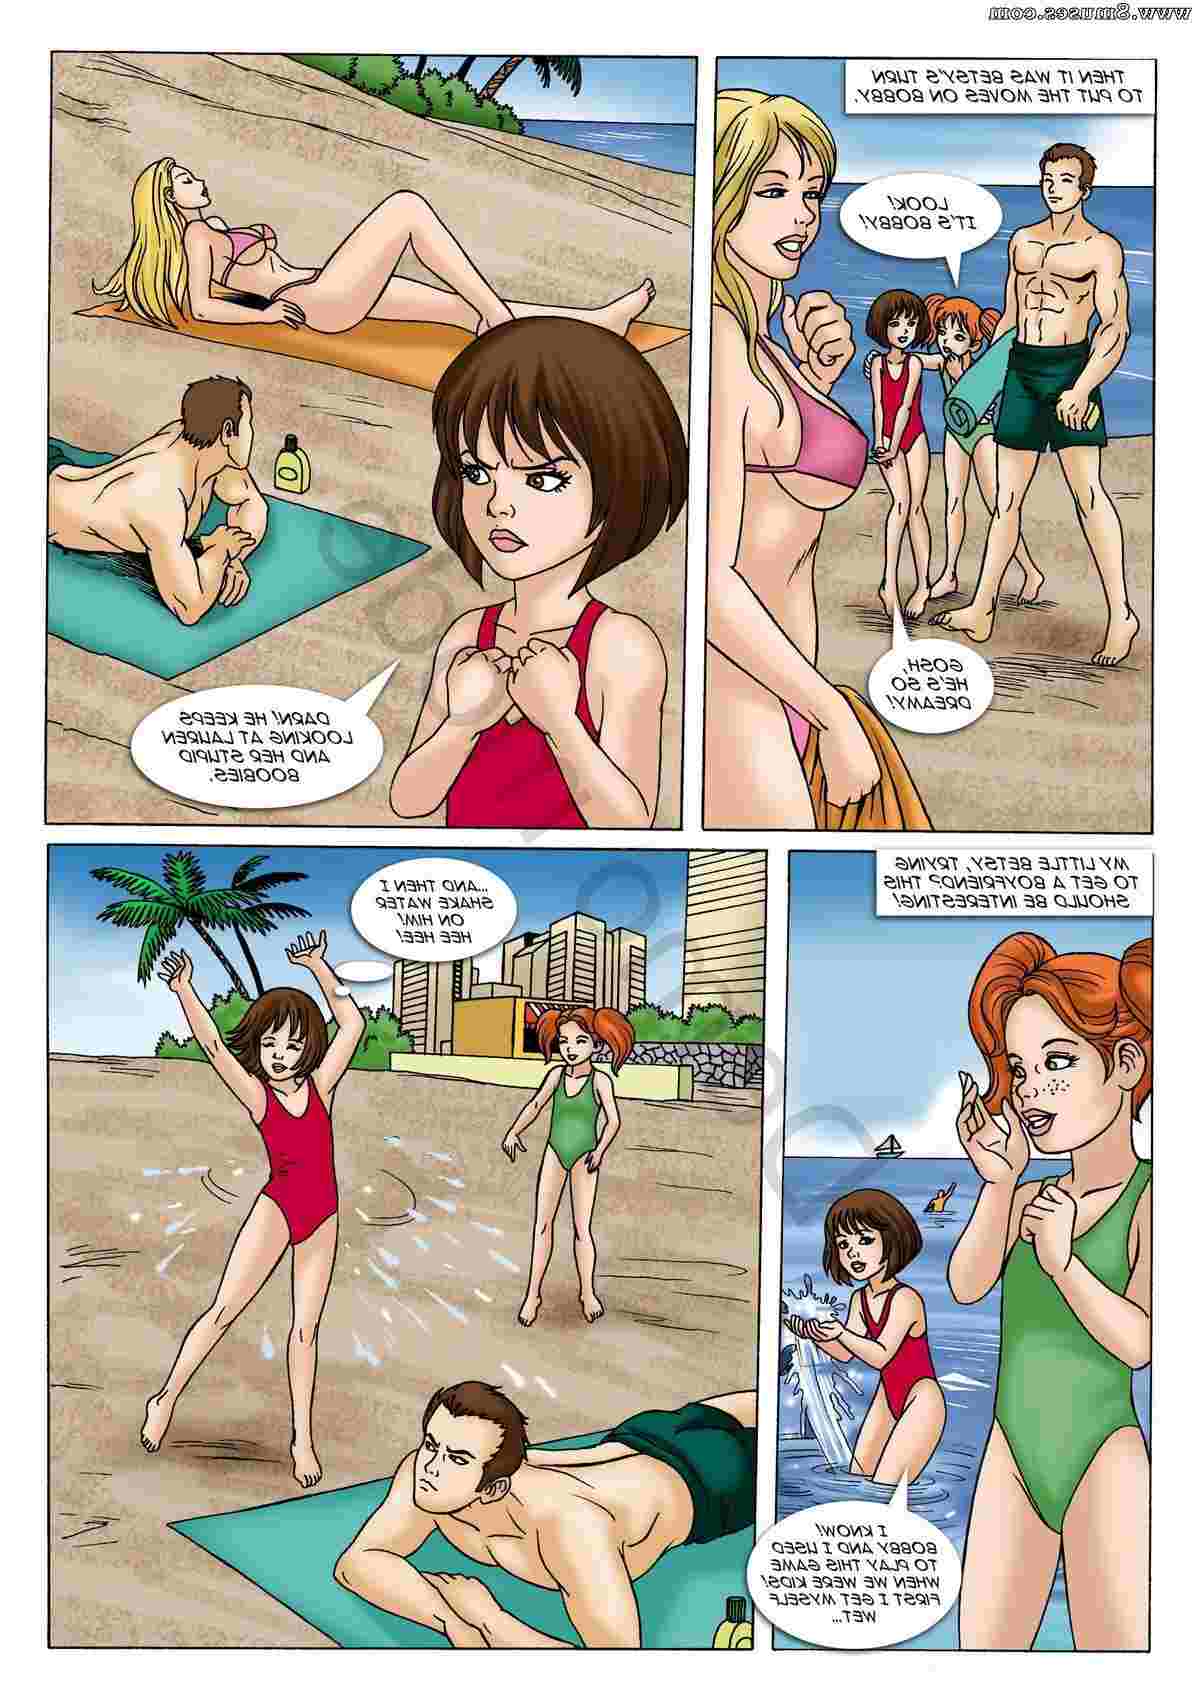 DreamTales-Comics/A-Tale-of-Two-Sisters A_Tale_of_Two_Sisters__8muses_-_Sex_and_Porn_Comics_14.jpg